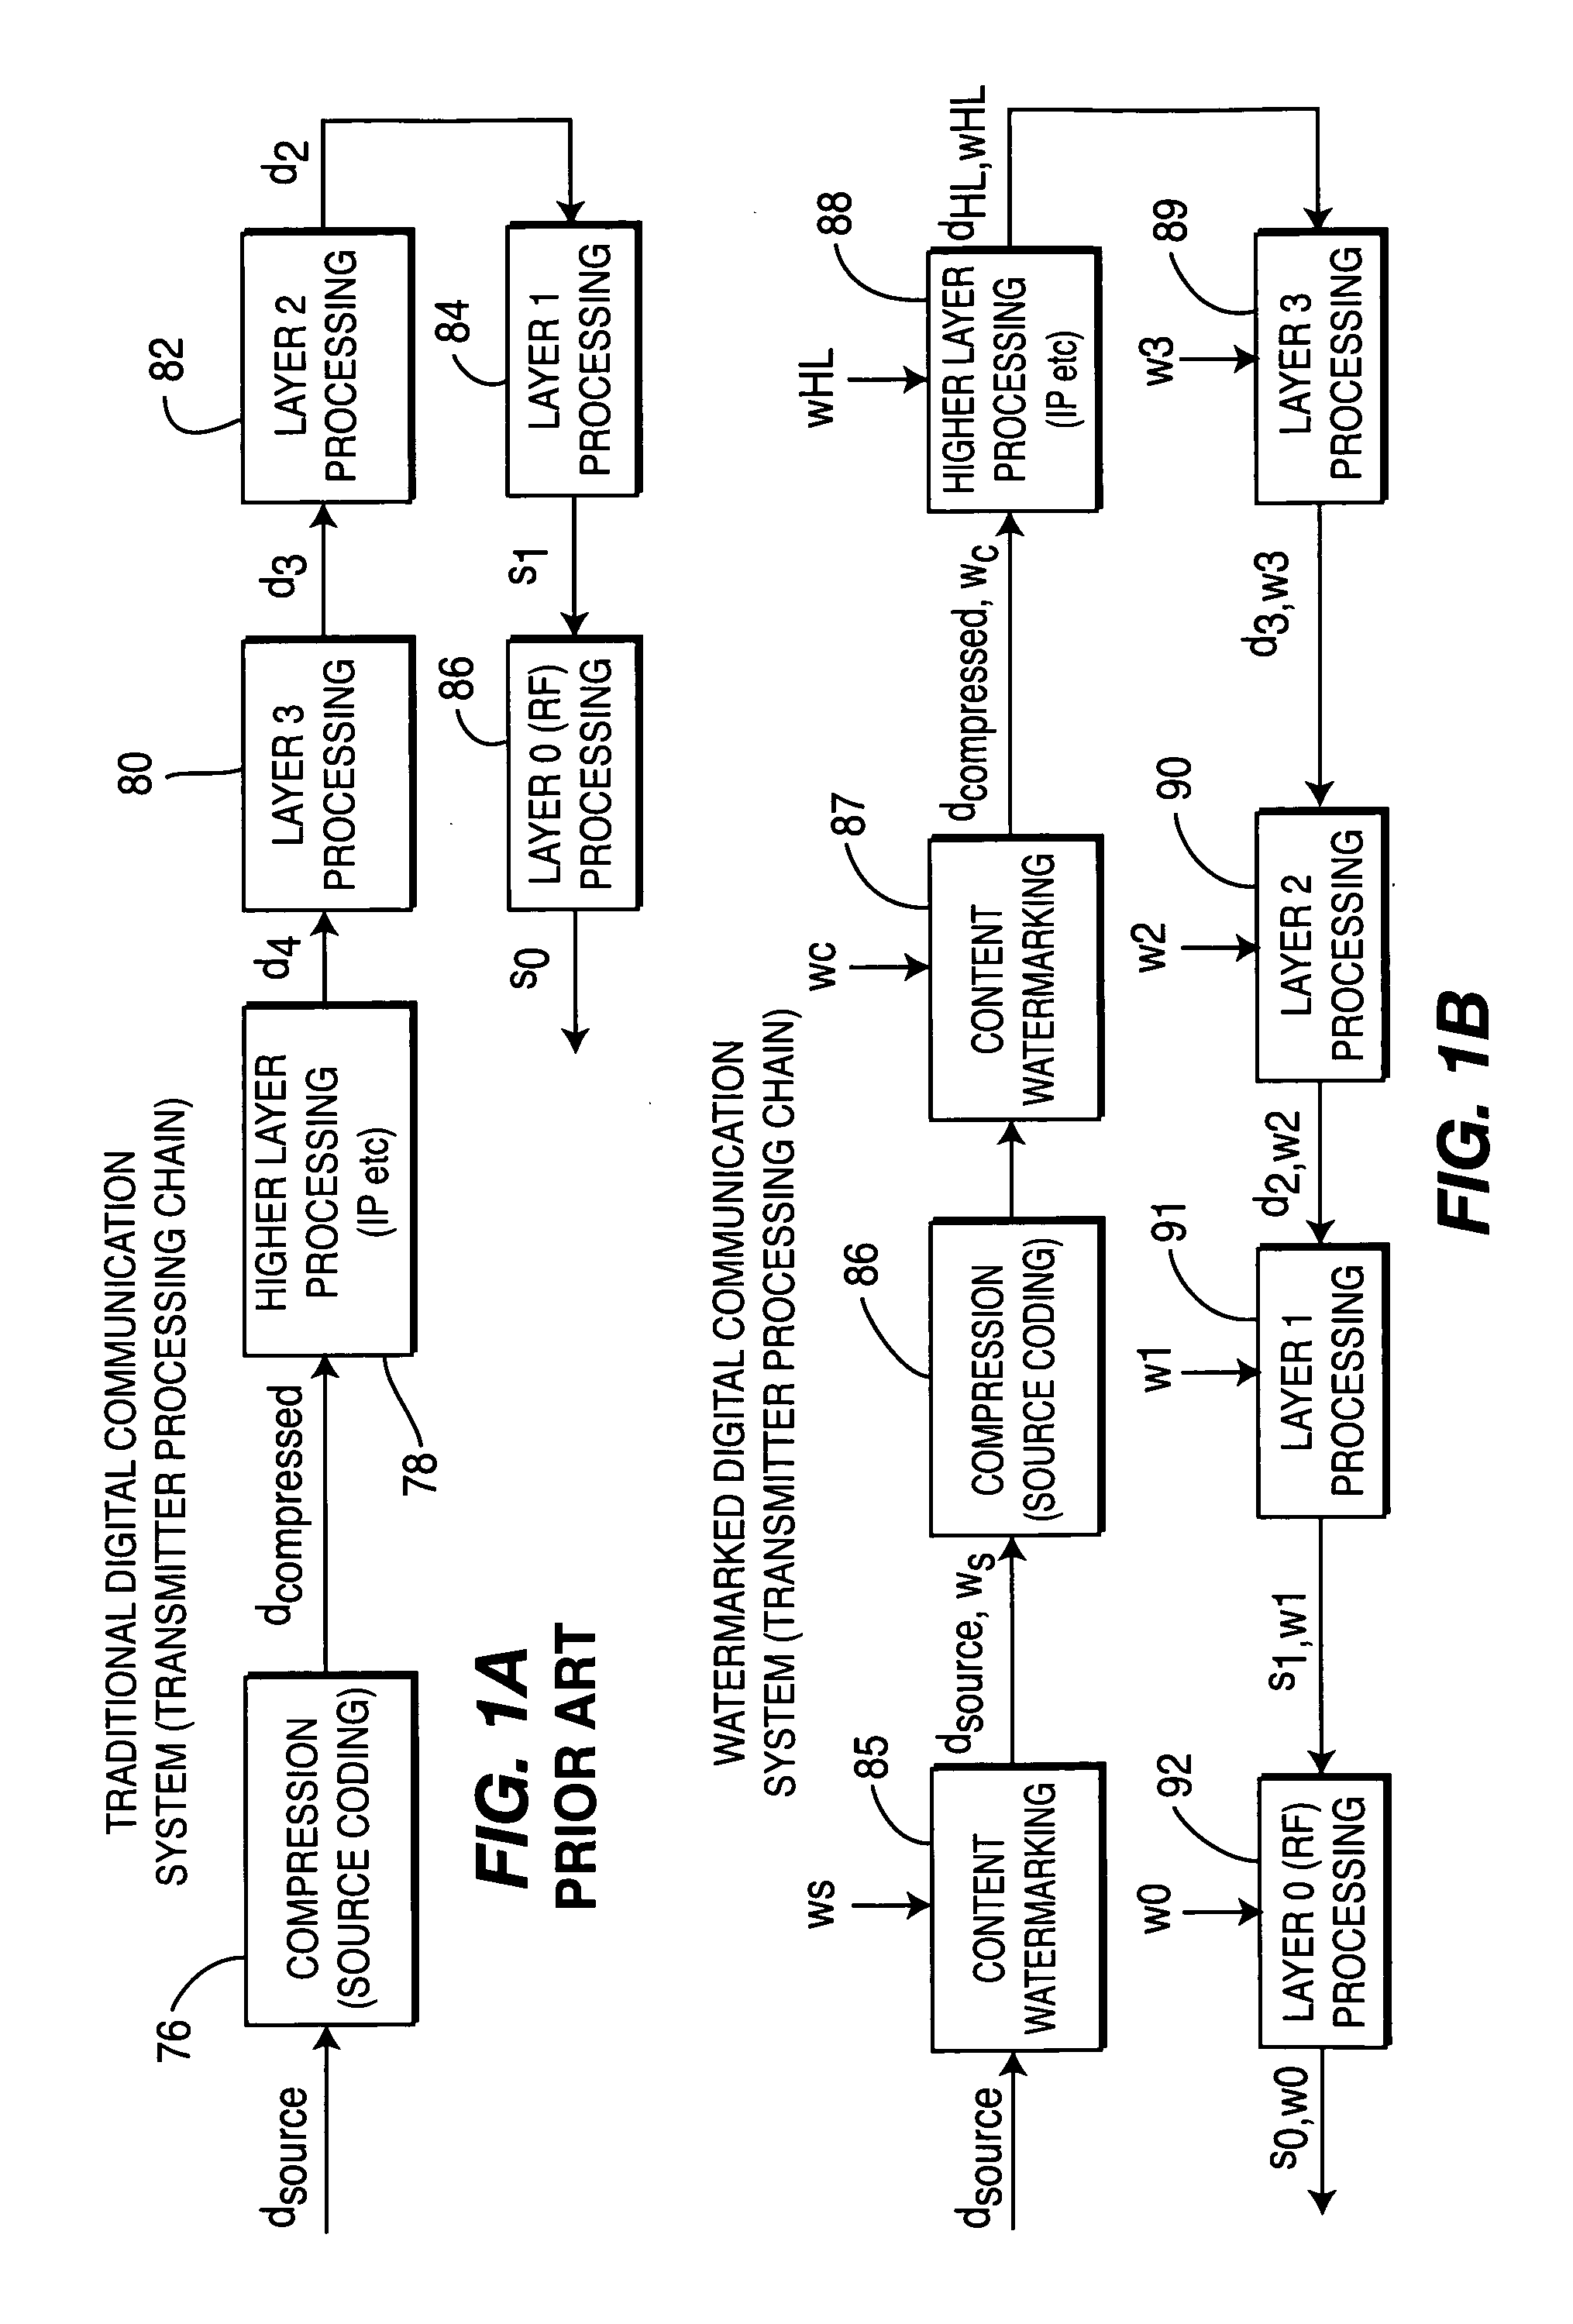 Orthogonal frequency division multiplexing (OFDM) method and apparatus for protecting and authenticating wirelessly transmitted digital information